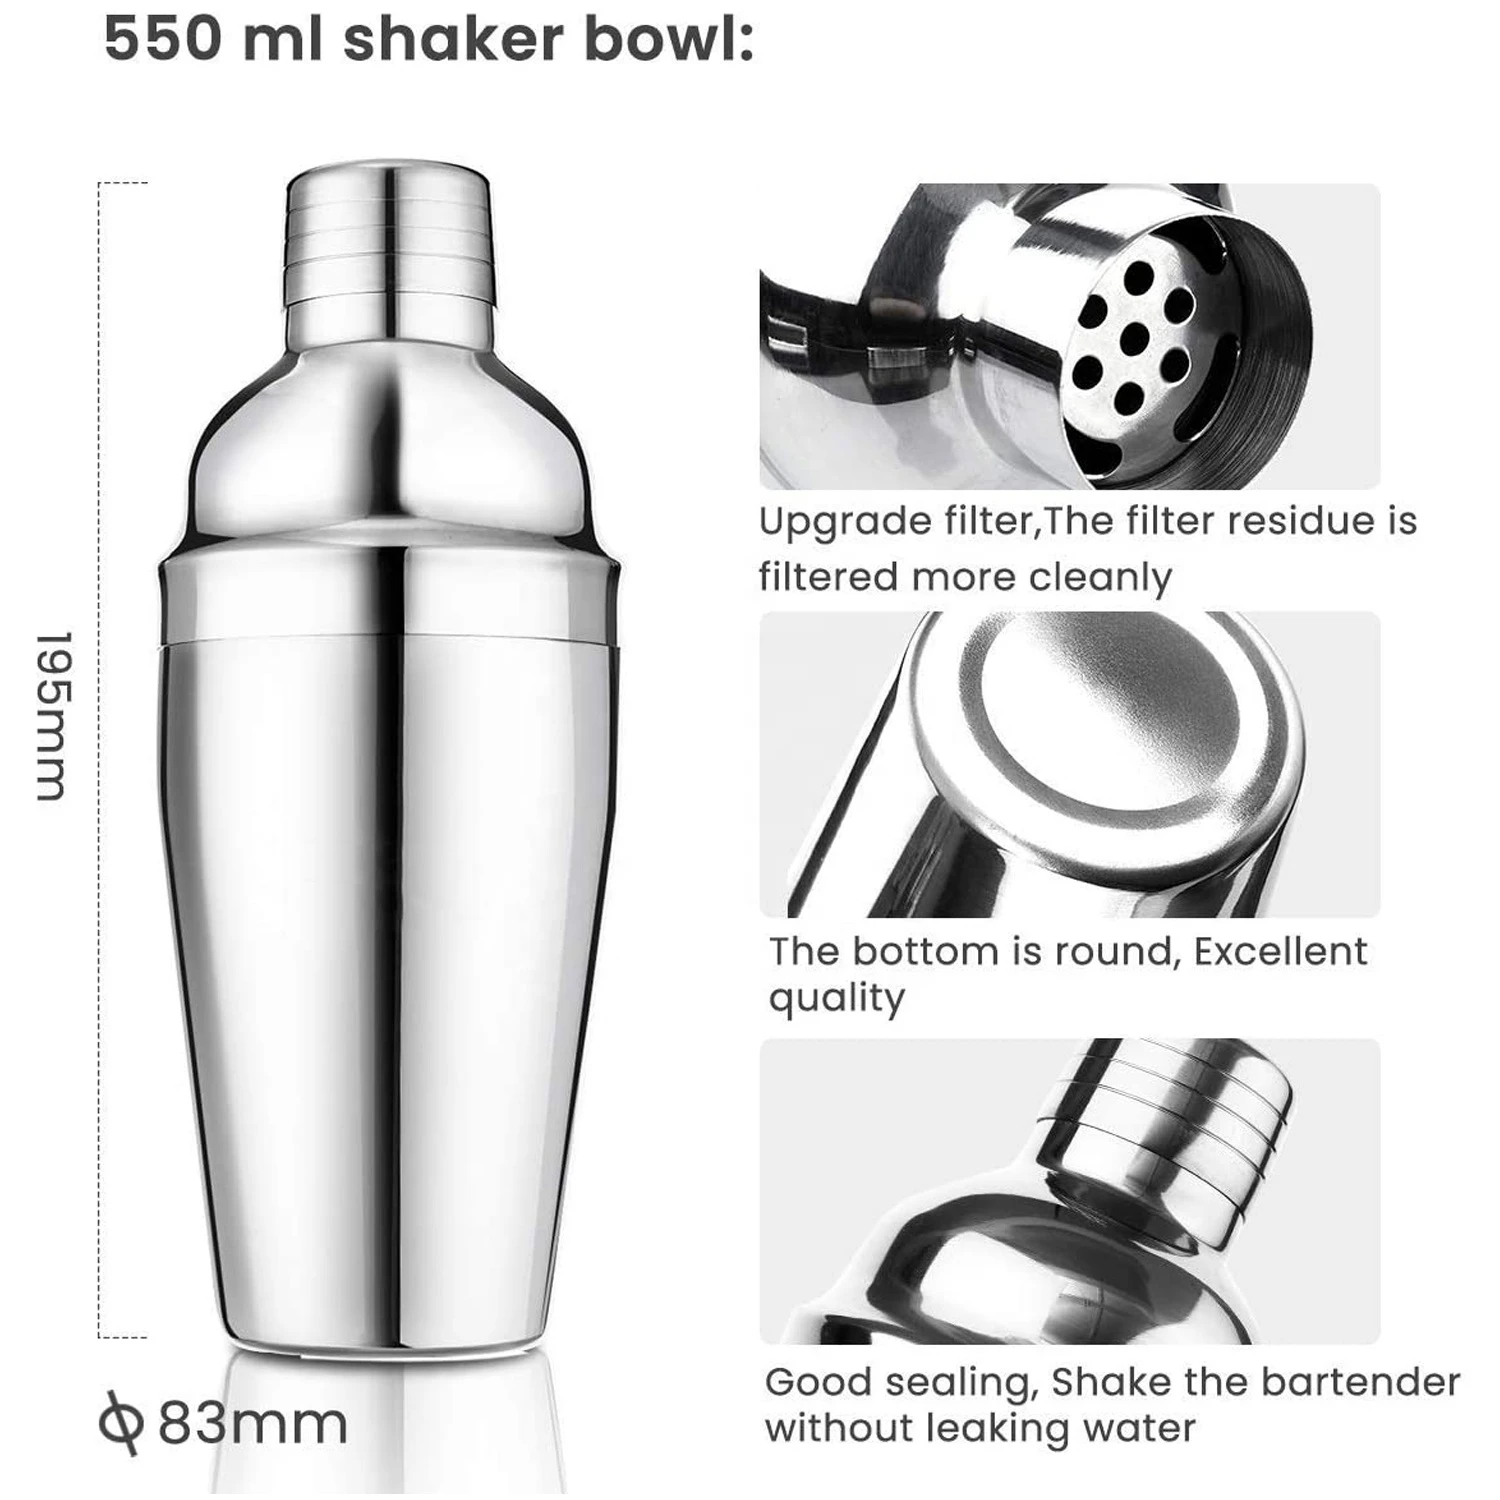 Amazon Top Seller 22 Pieces Custom Stainless Steel Cocktail Shaker Making Set 550ml Bartender Kit with Bar Tools Accessories